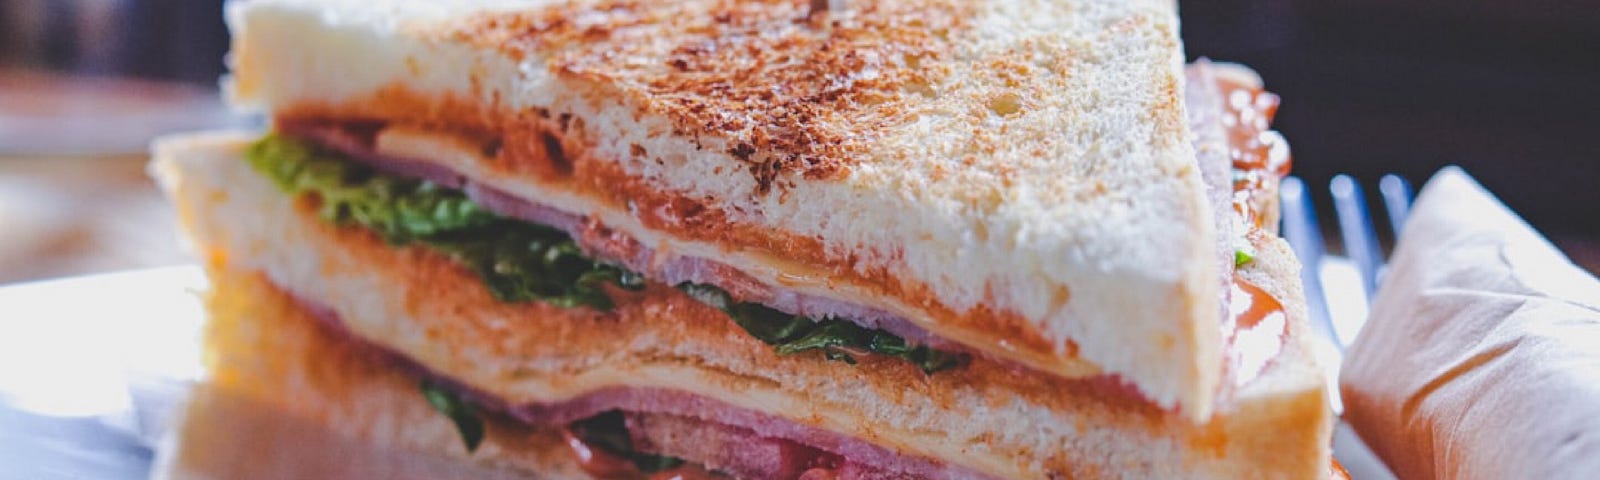 Layers of stuff in the sandwich